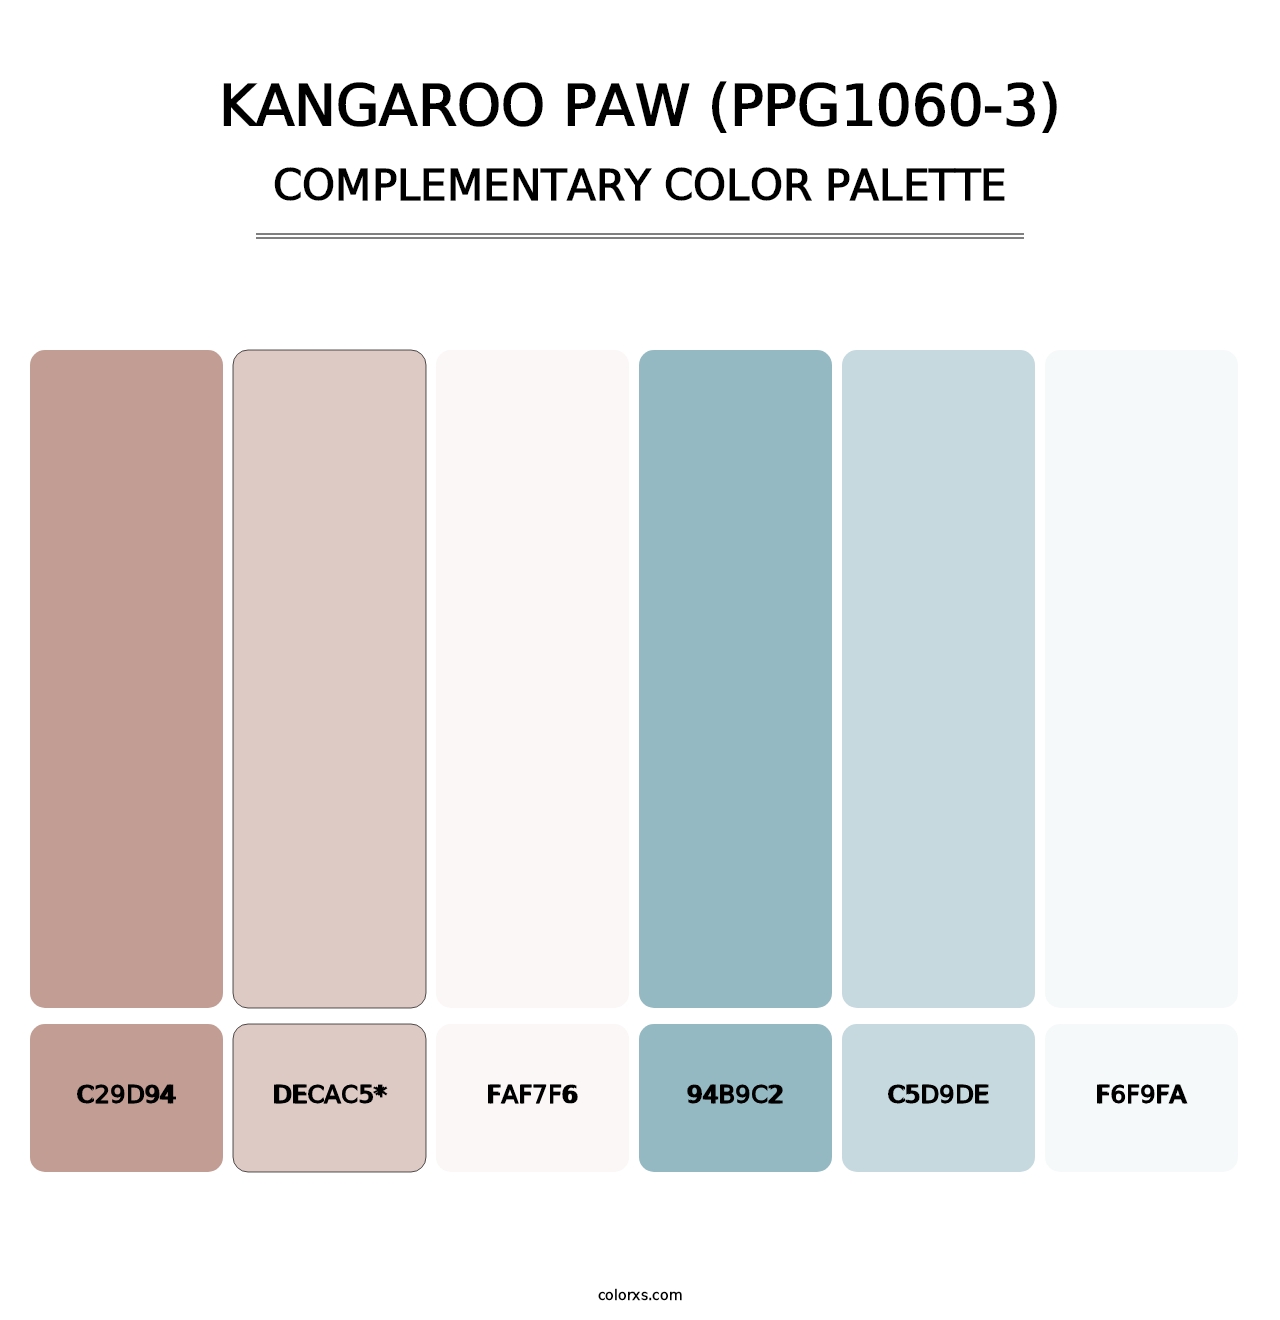 Kangaroo Paw (PPG1060-3) - Complementary Color Palette